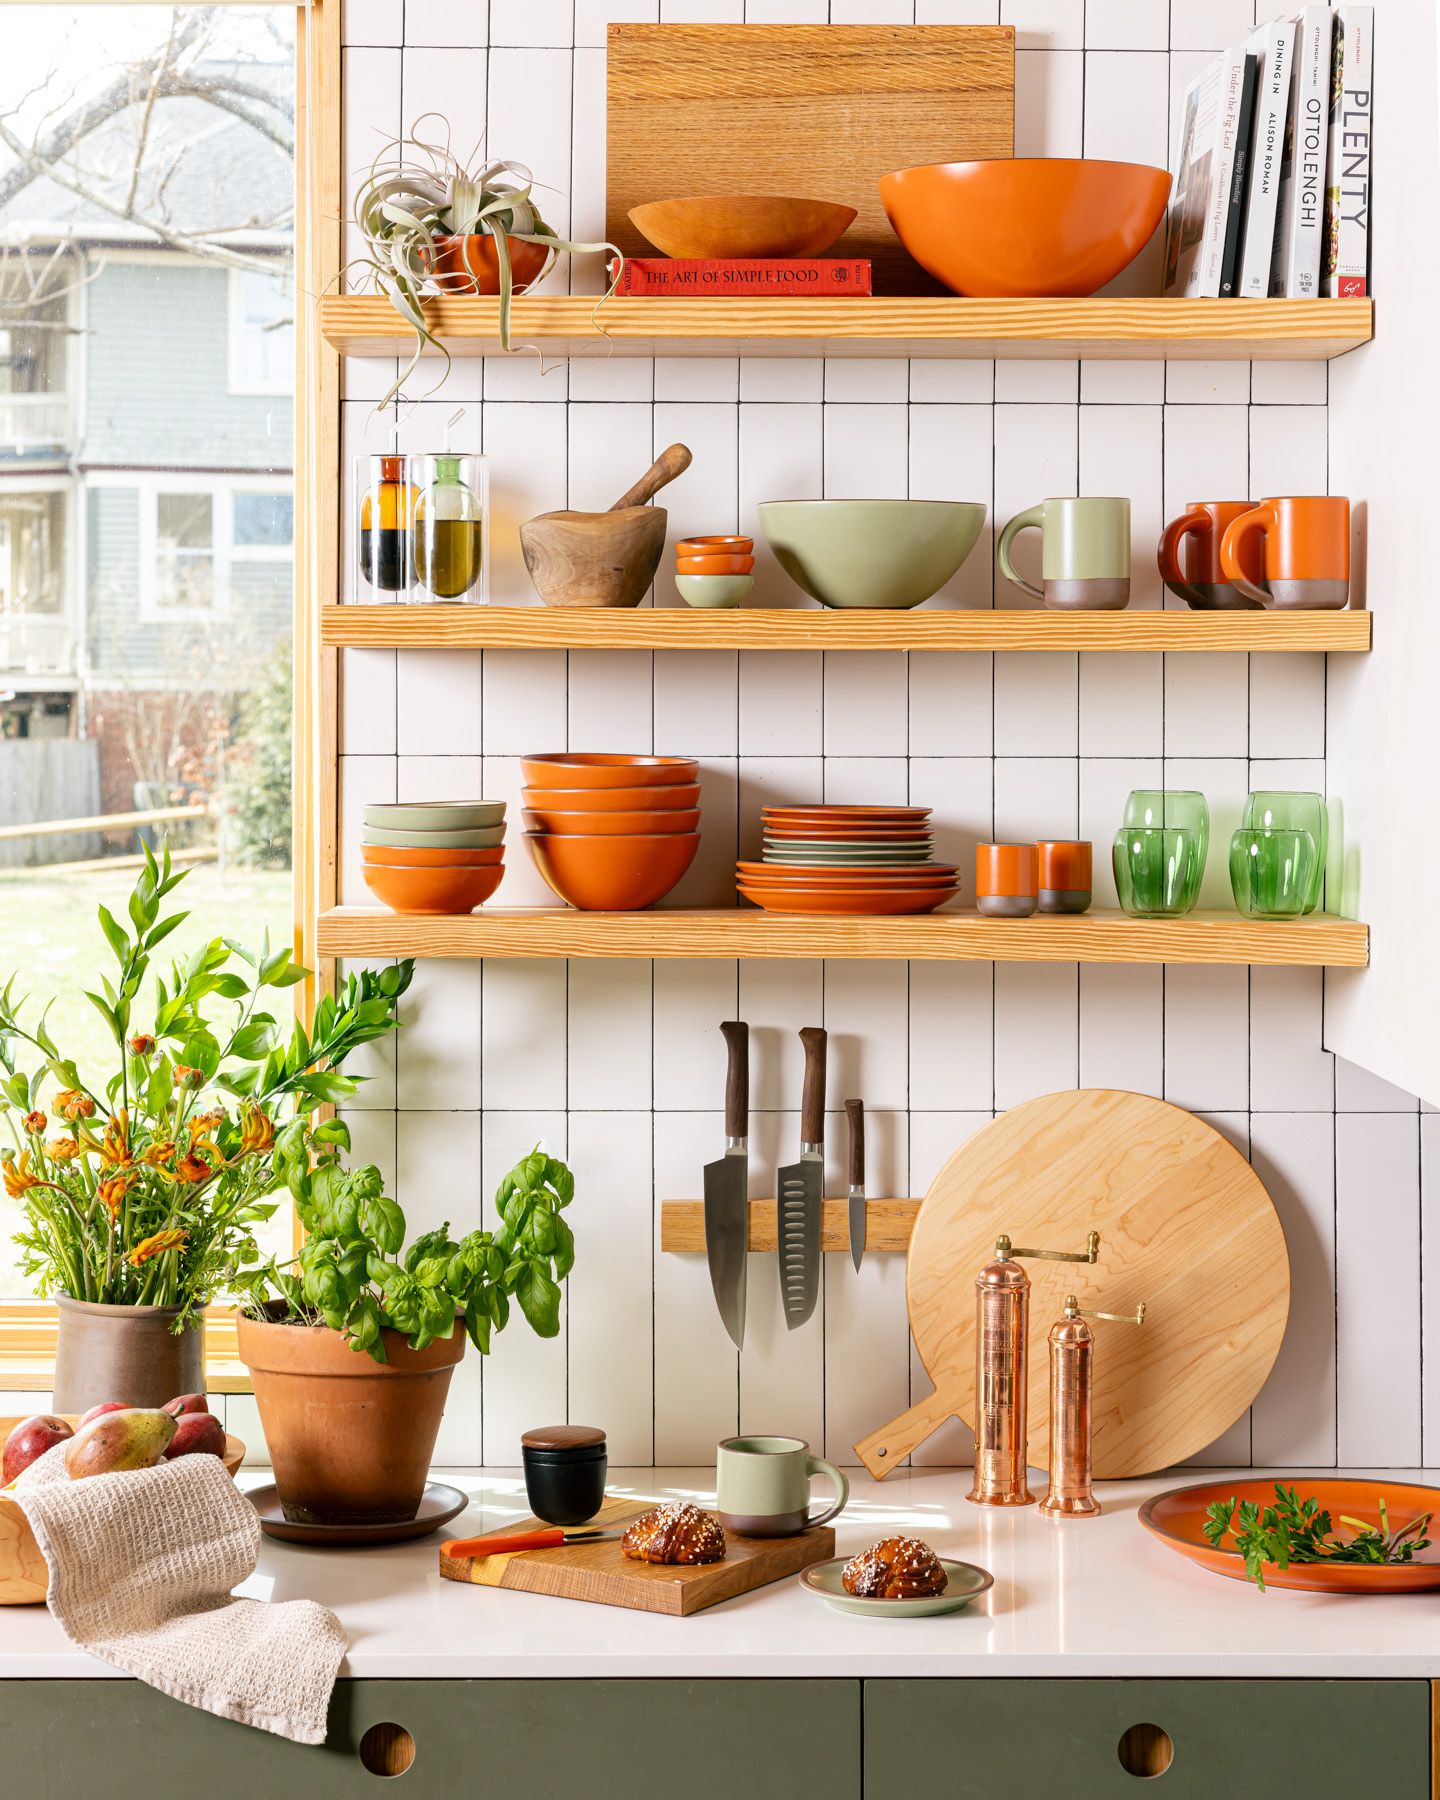 In a kitchen, ceramic bowls and mugs in bold orange and calming sage green colors fill floating shelves, along with green glasses and other kitchen tools. On the counter are various kitchen tools like a chef's knives, copper pepper and salt mills, cutting board with pastry, and potted plants.